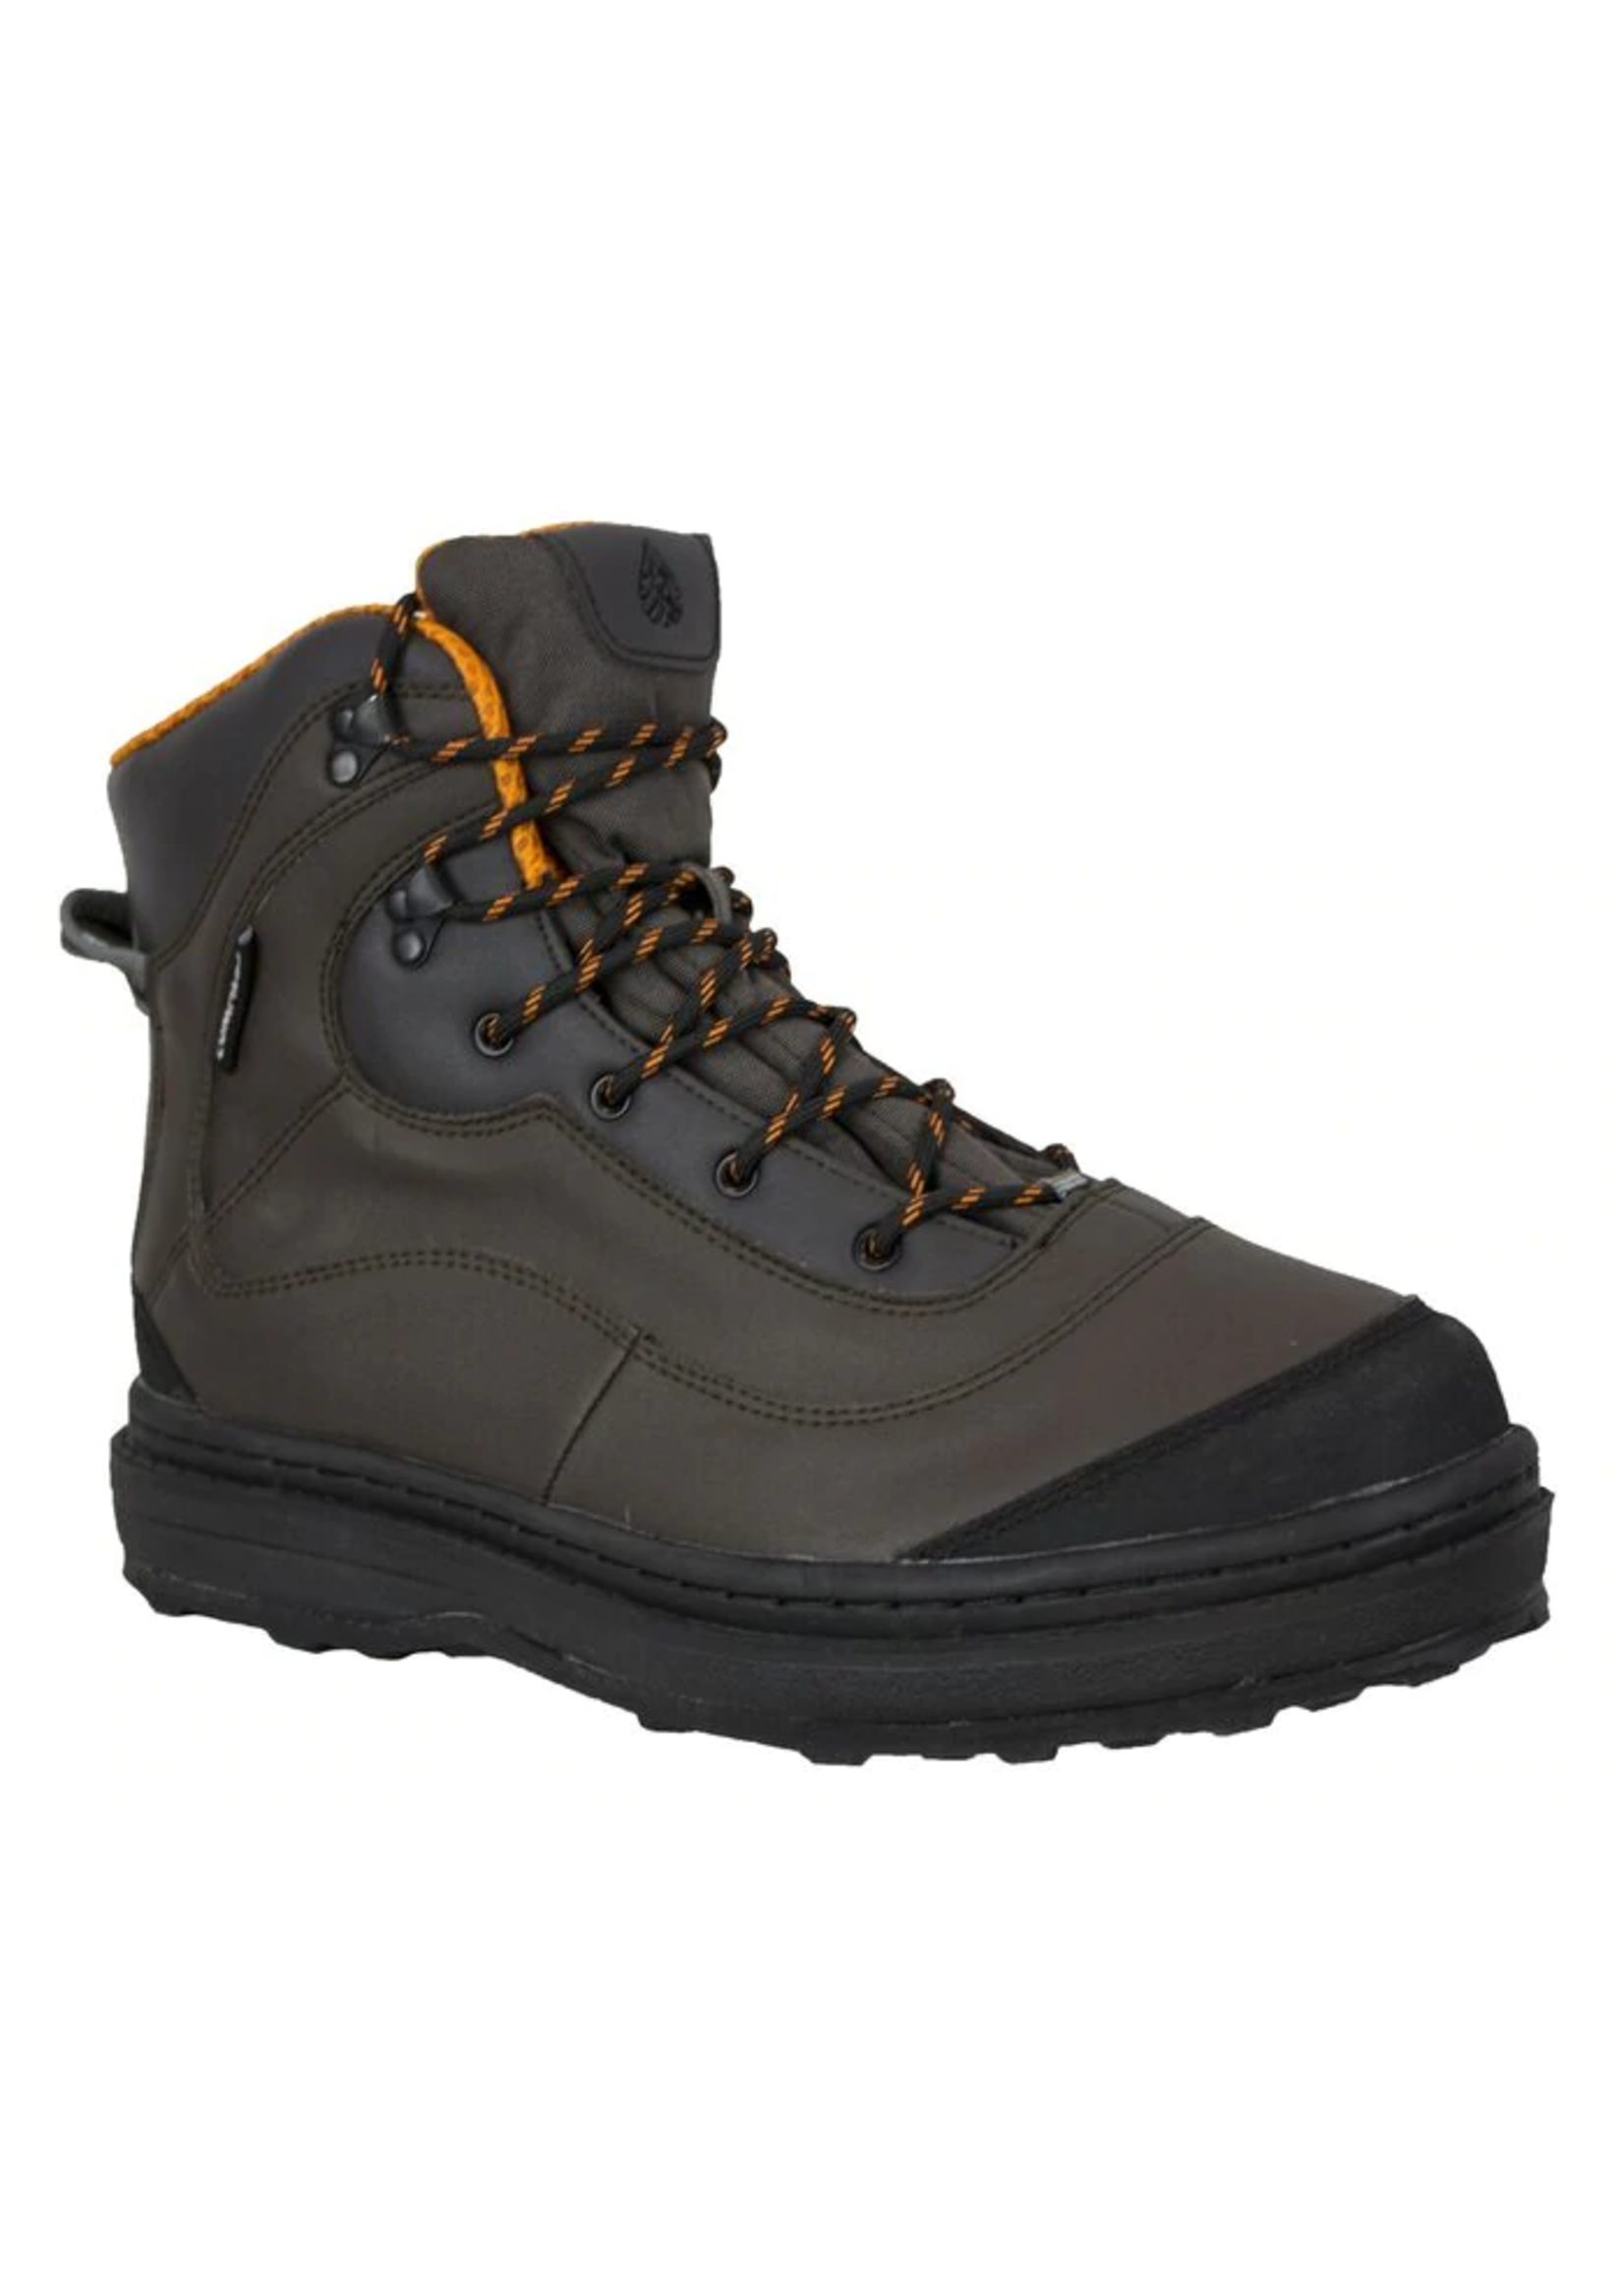 Compass 360 Compass 360 Tailwater II Cleated Sole Wading Boots